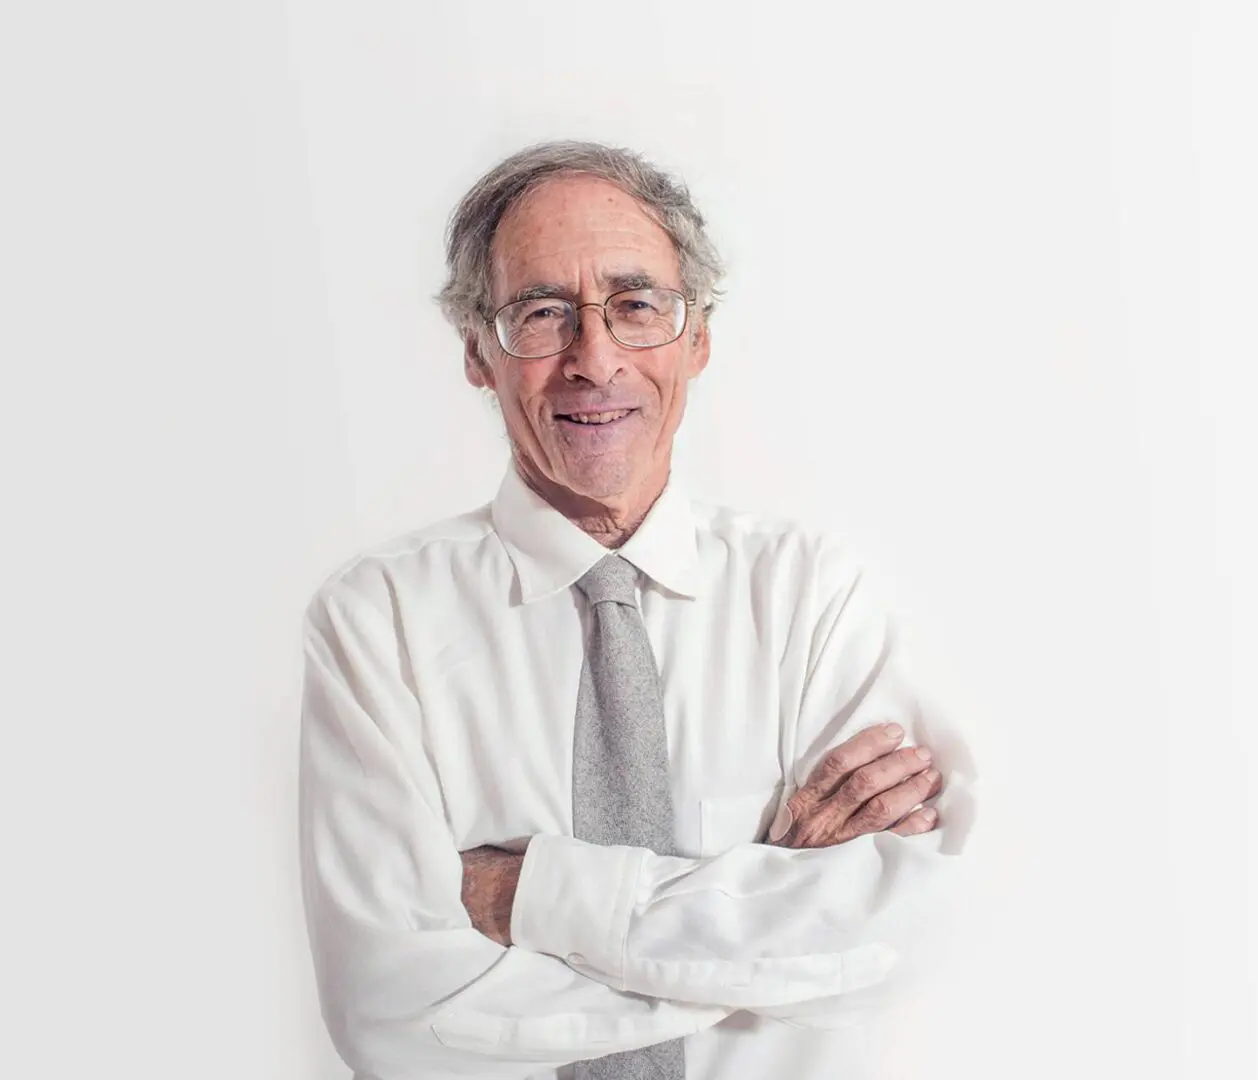 A man with glasses and a tie standing in front of a white wall.